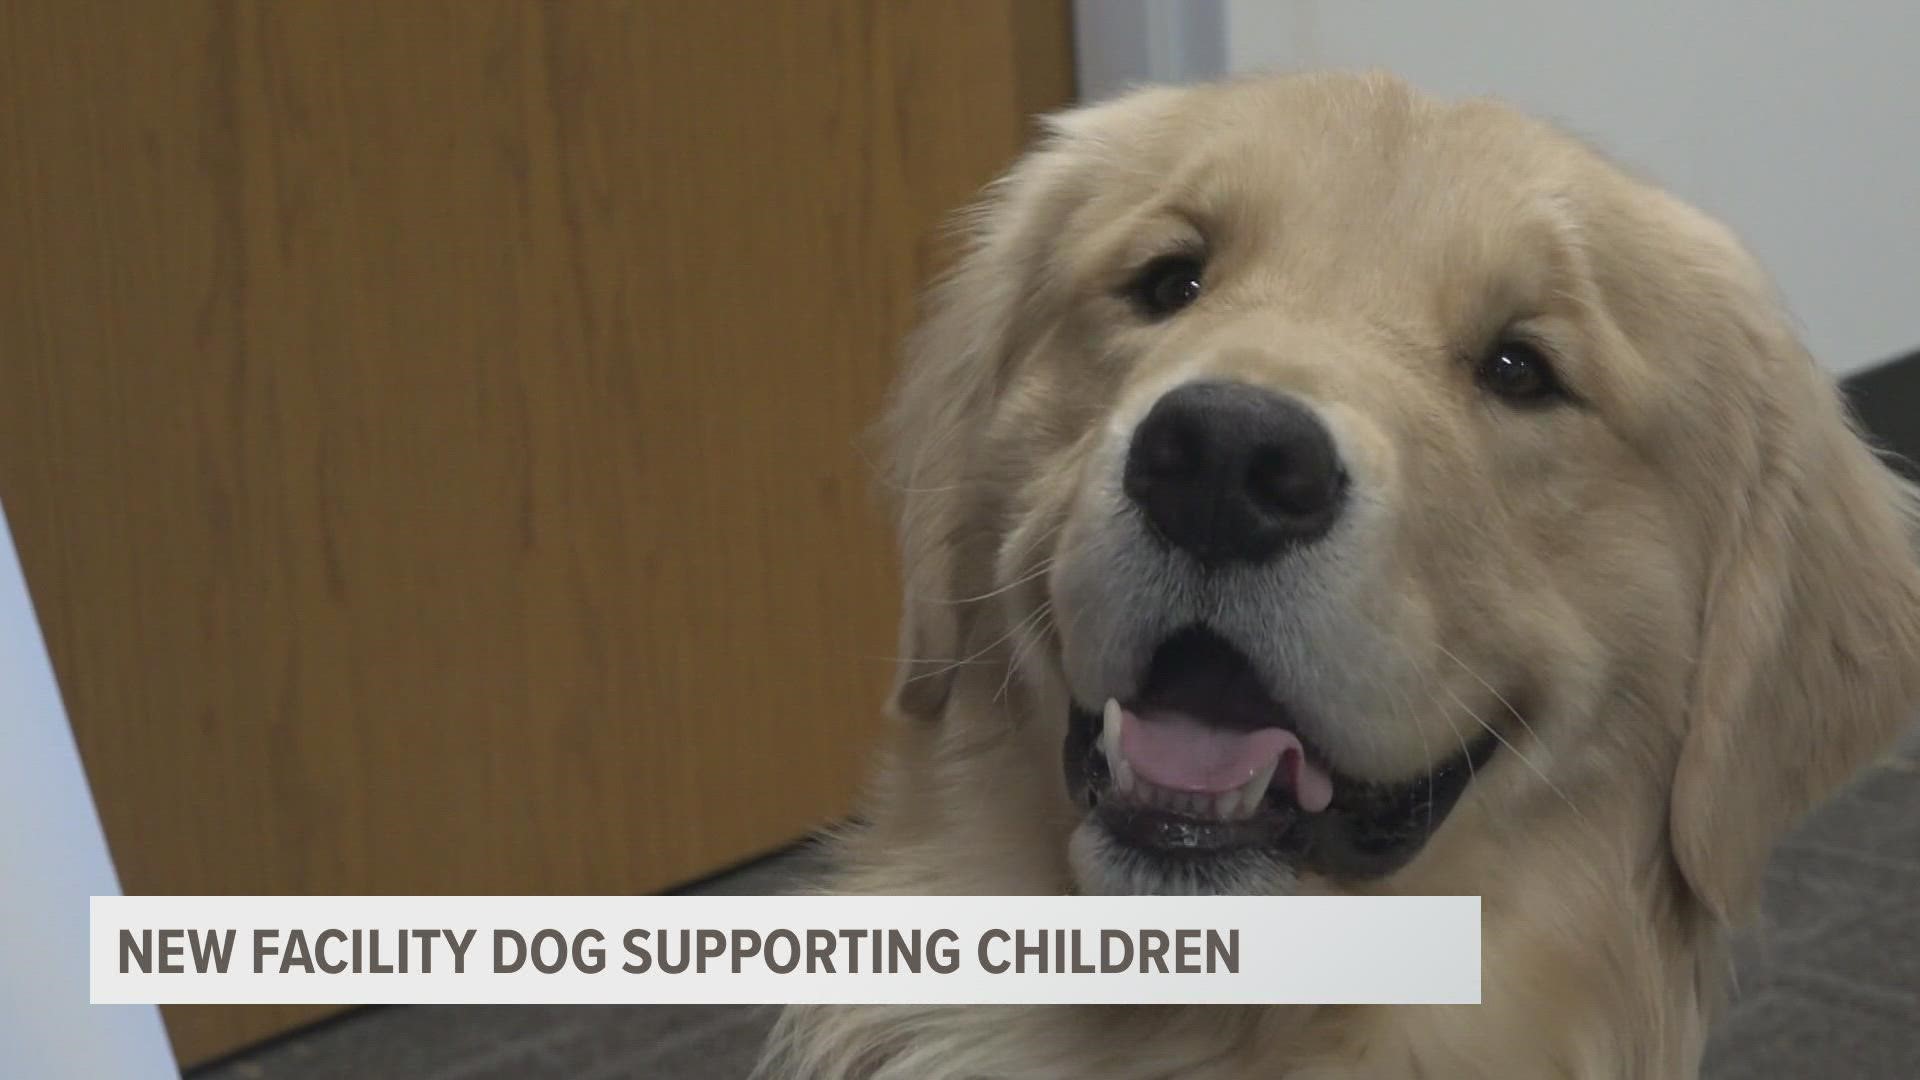 Bacon will join therapy sessions with kids at the Children's Advocacy Center of Kent County in a few weeks.